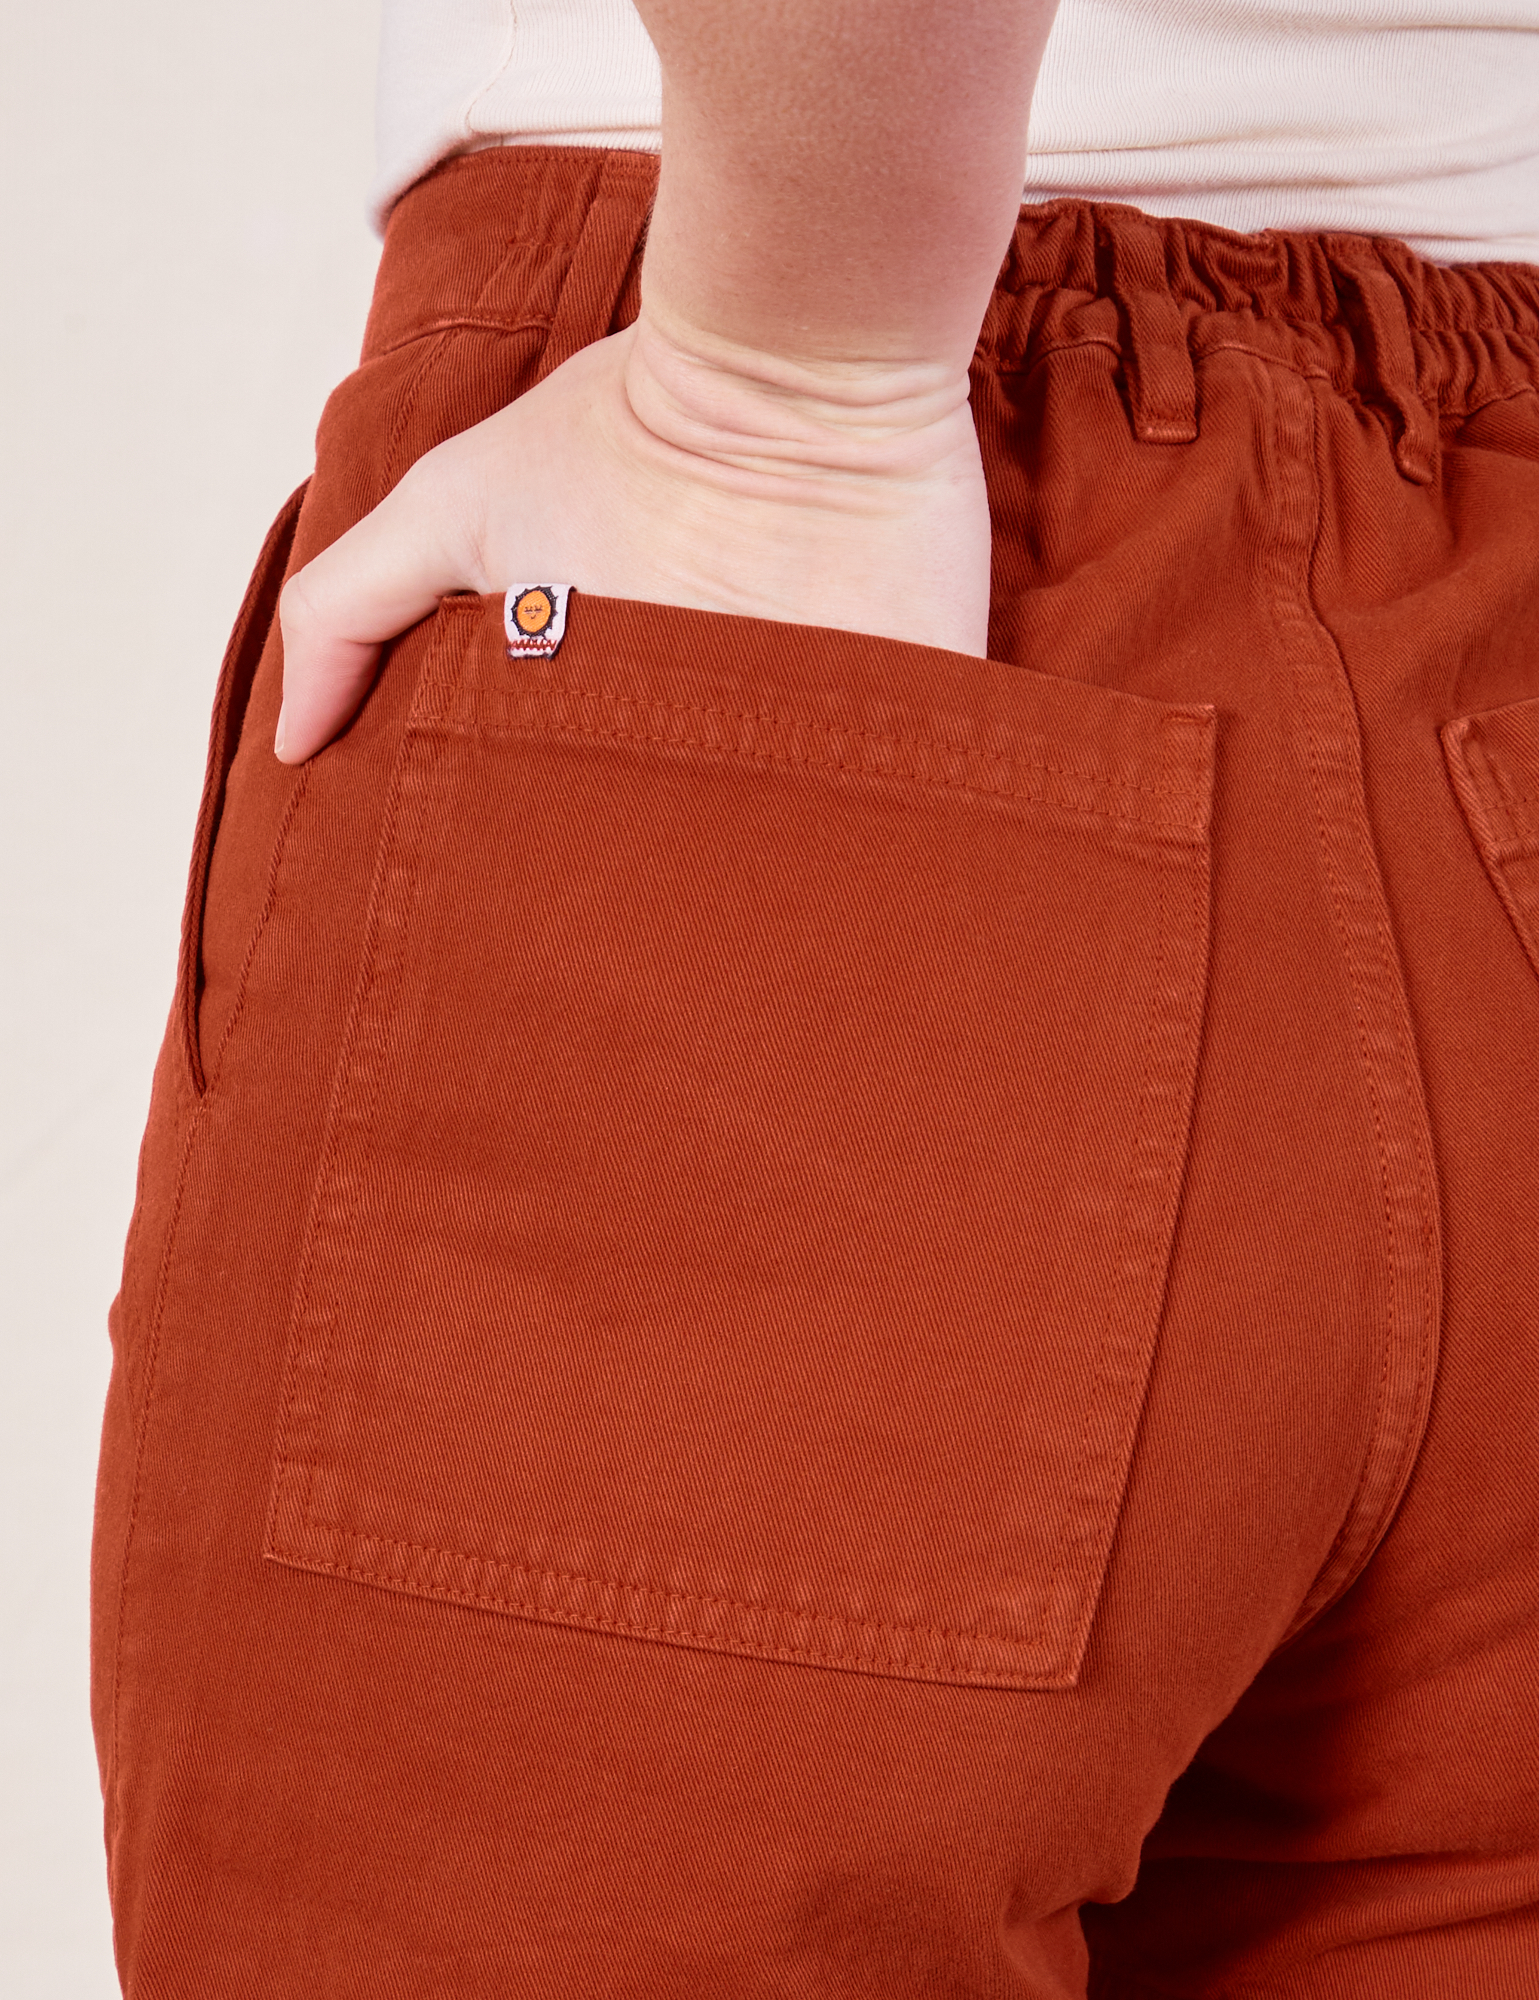 Classic Work Shorts in Paprika back pocket close up. Alex has her hand in the pocket.